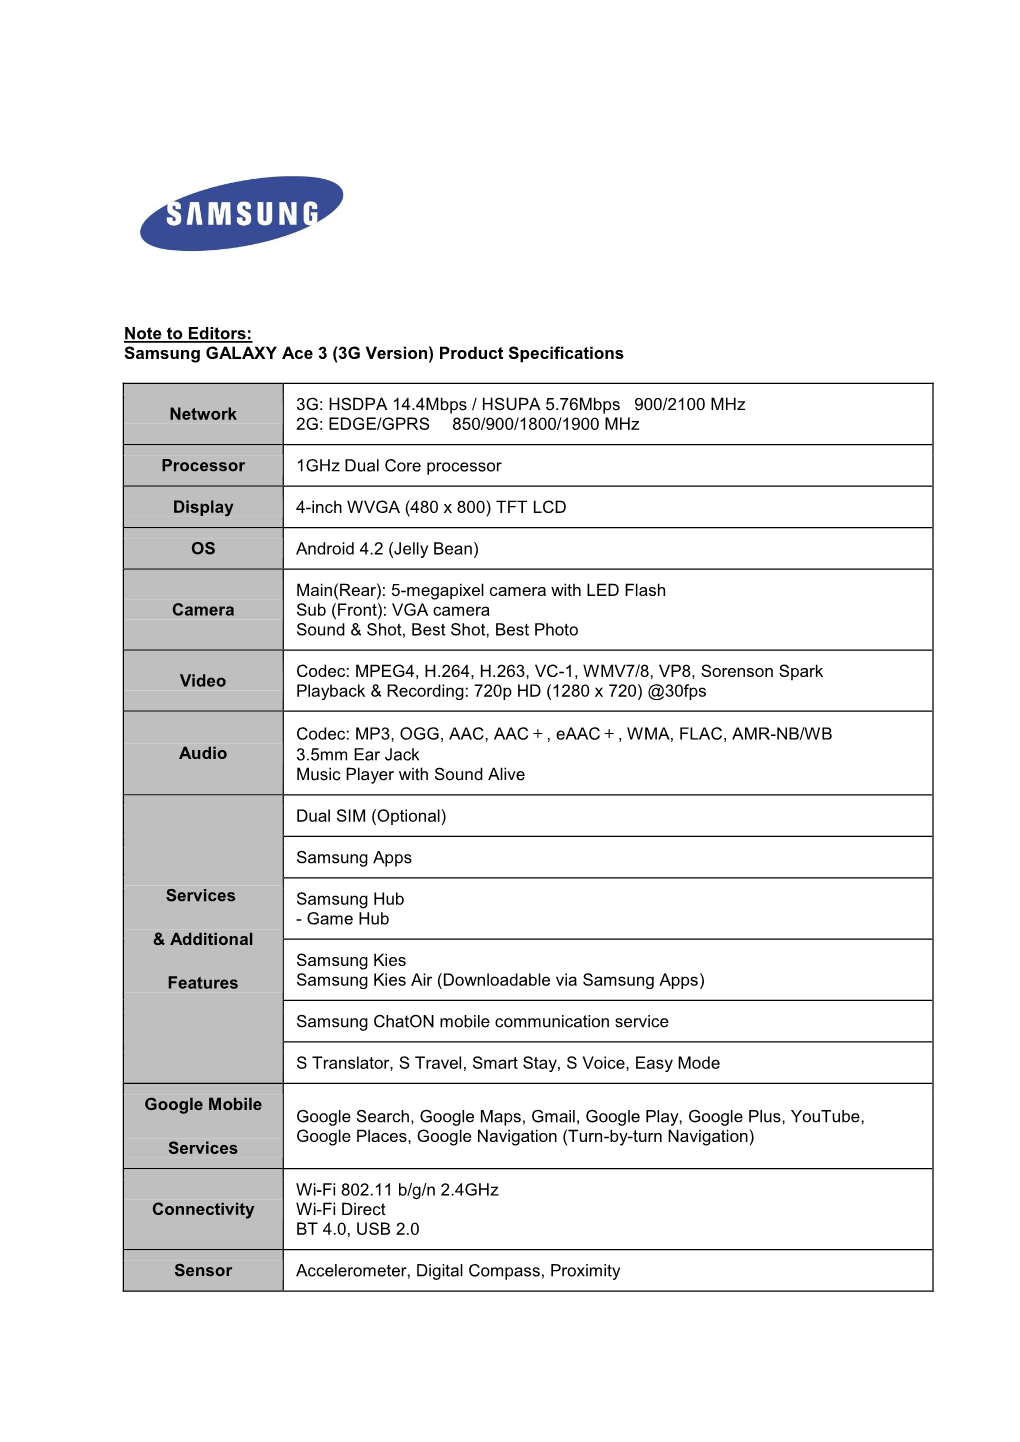 Note to Editors: Samsung GALAXY Ace 3 (3G Version) Product Specifications